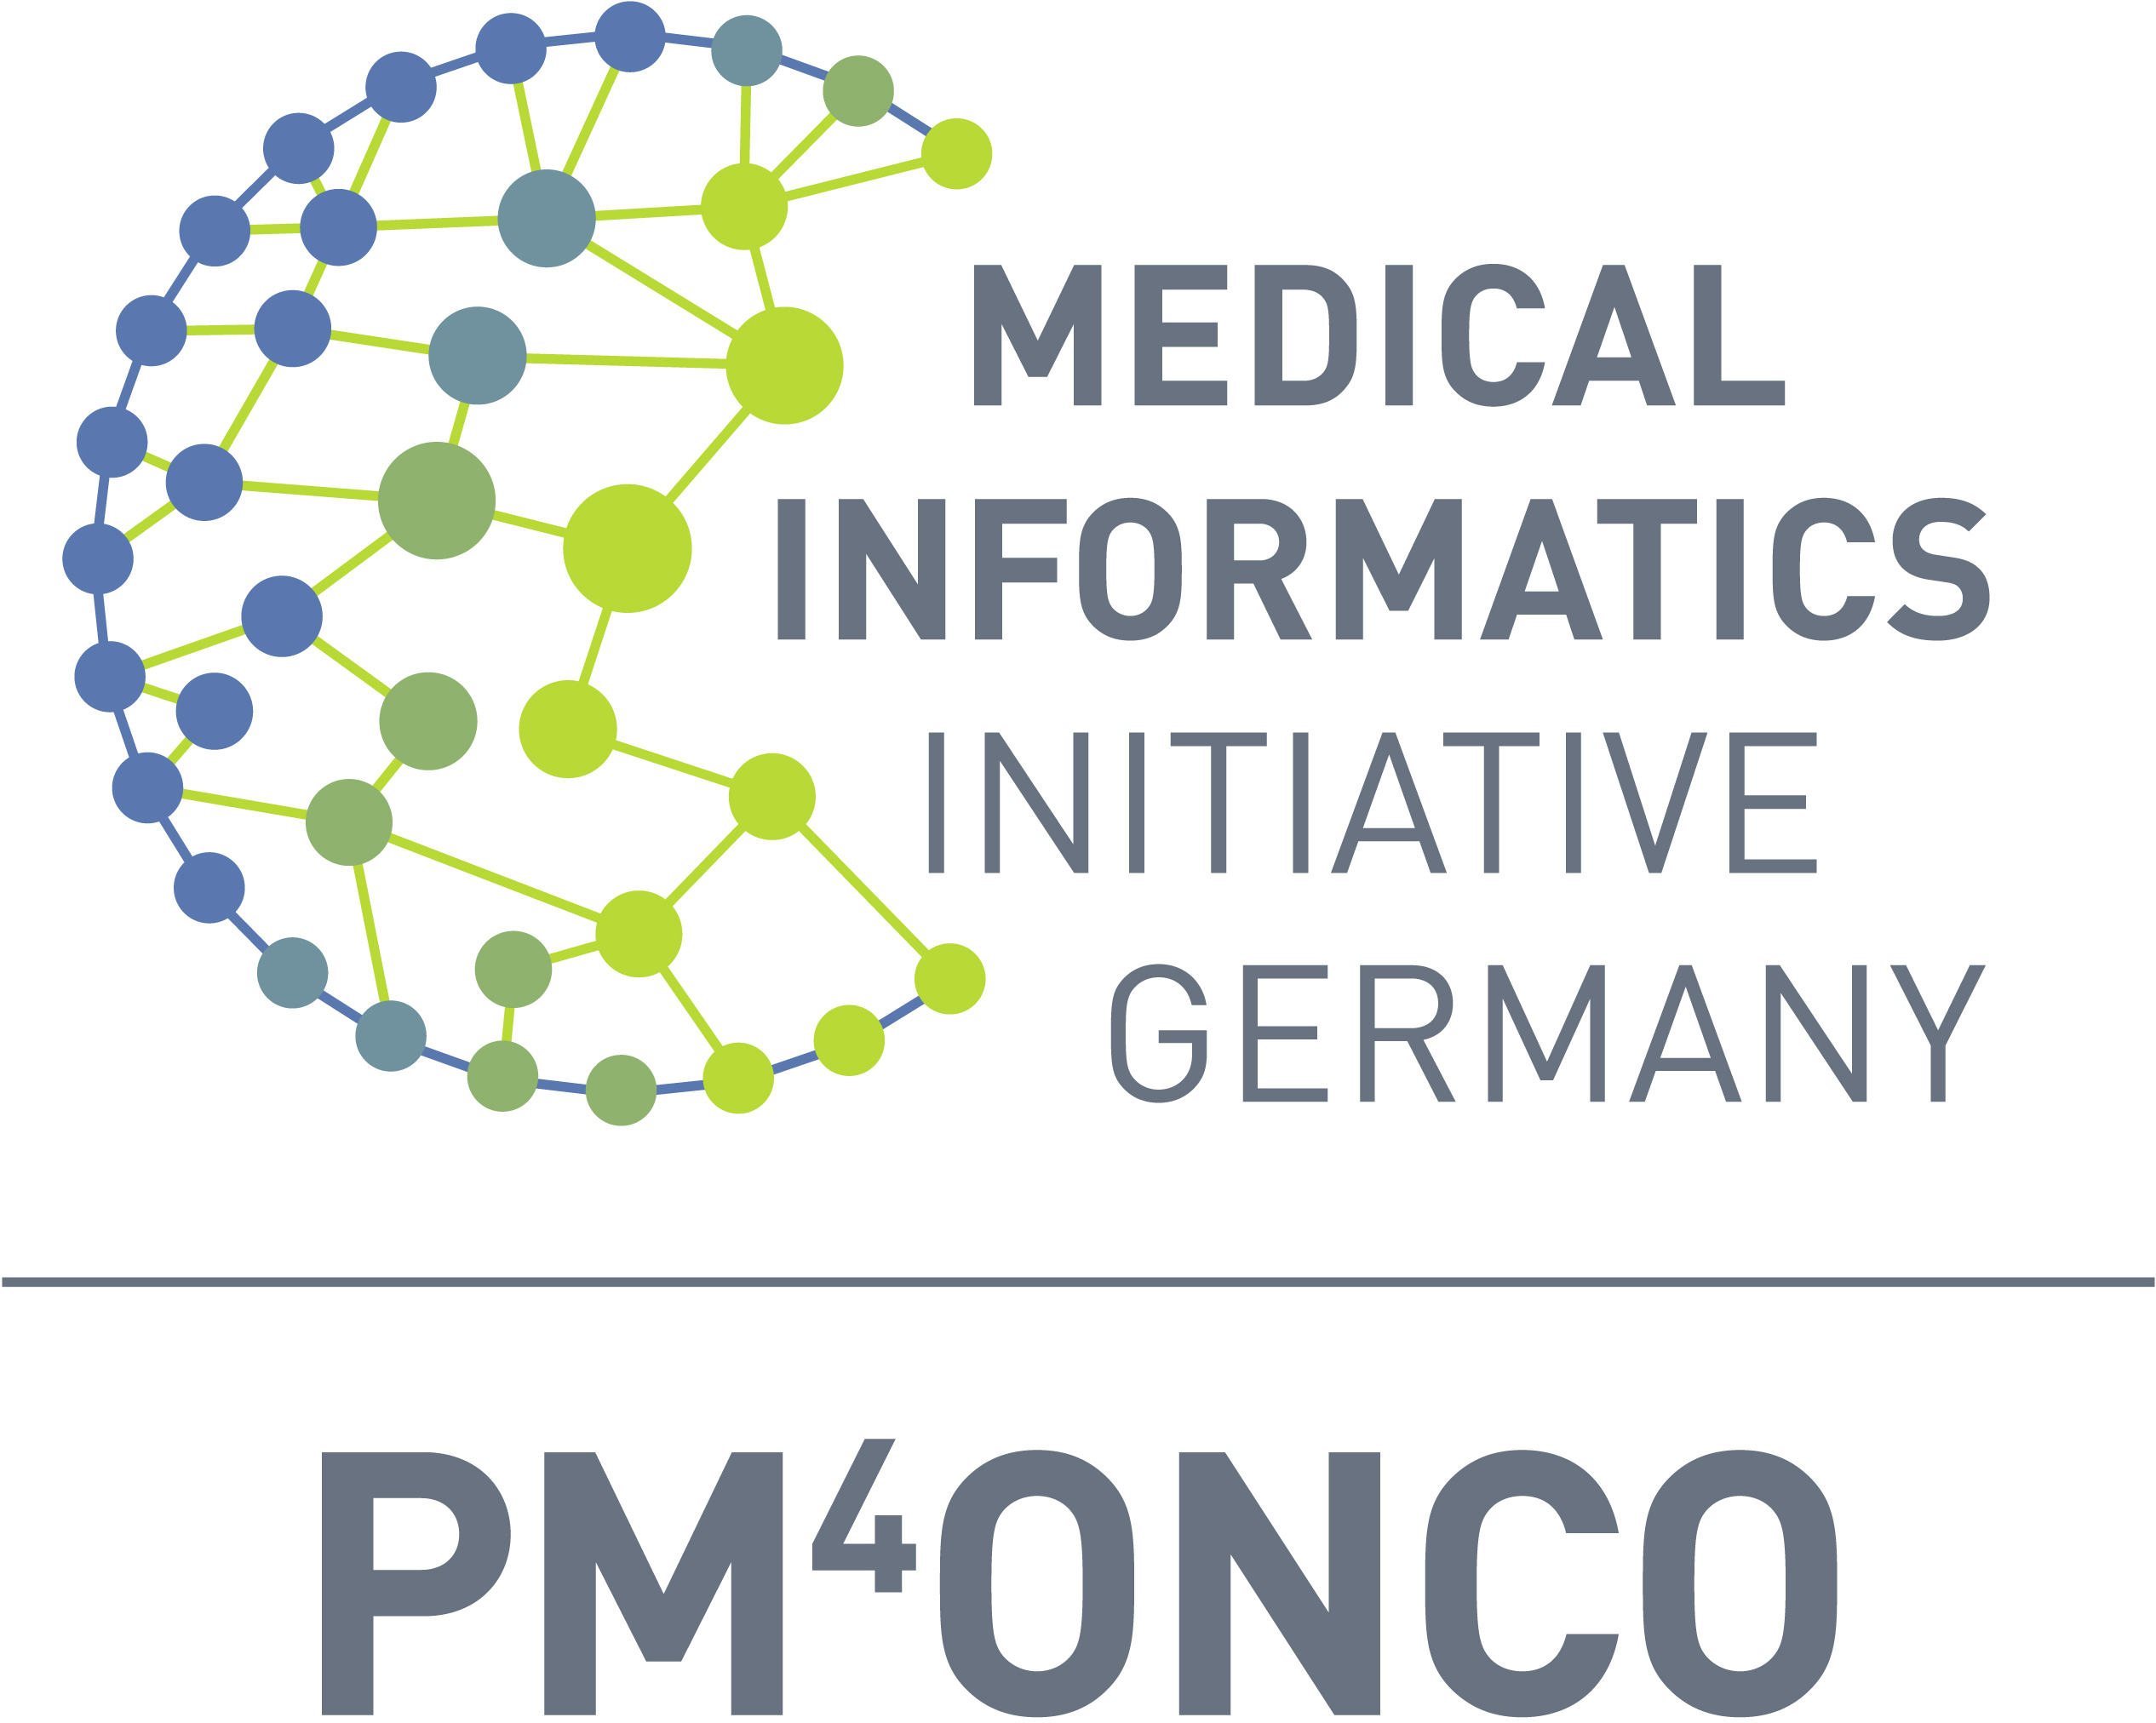 PM4Onco - Personalized Medicine for Oncology